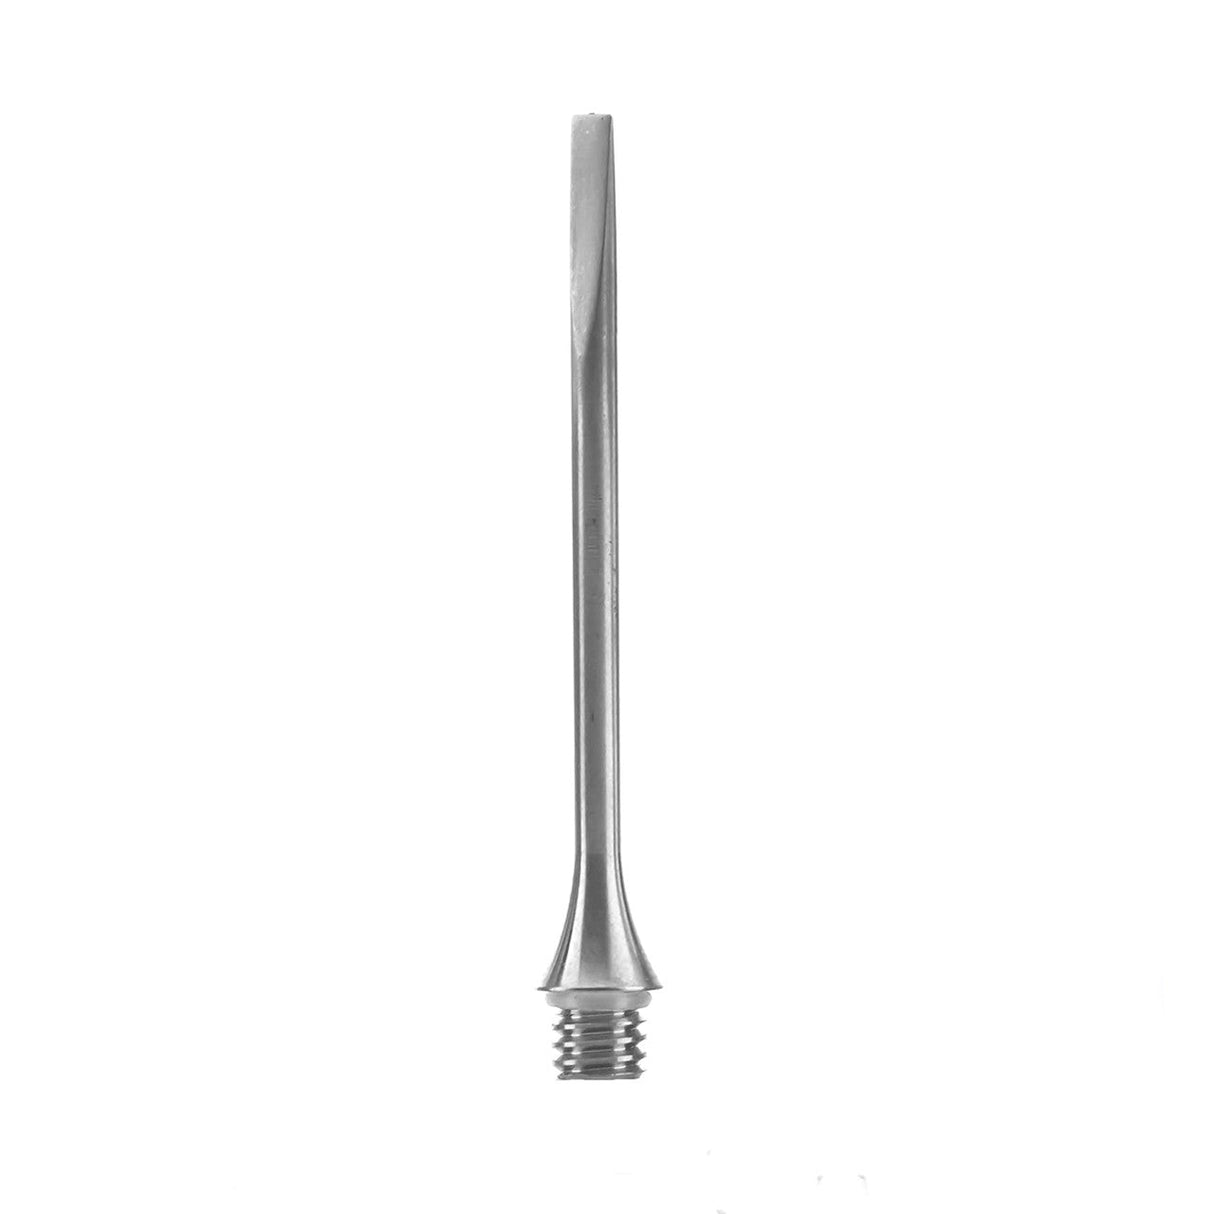 Terpometer Titanium Slot Head Tool for Dab Rigs, Silver, Compact Design, Front View